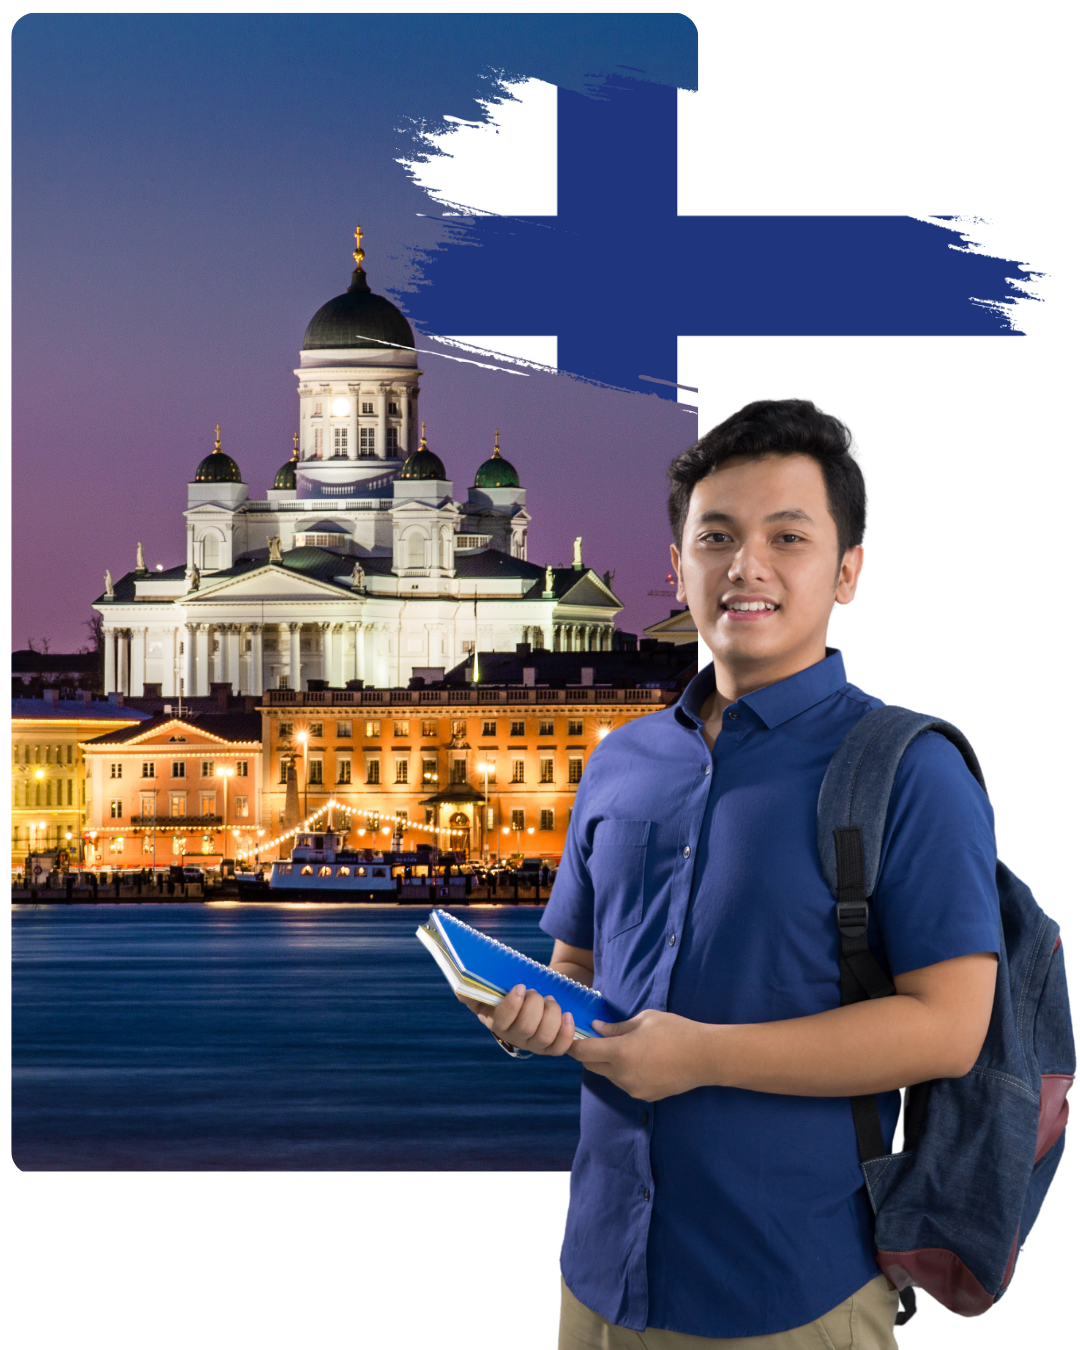 A student looking forward to study in Finland